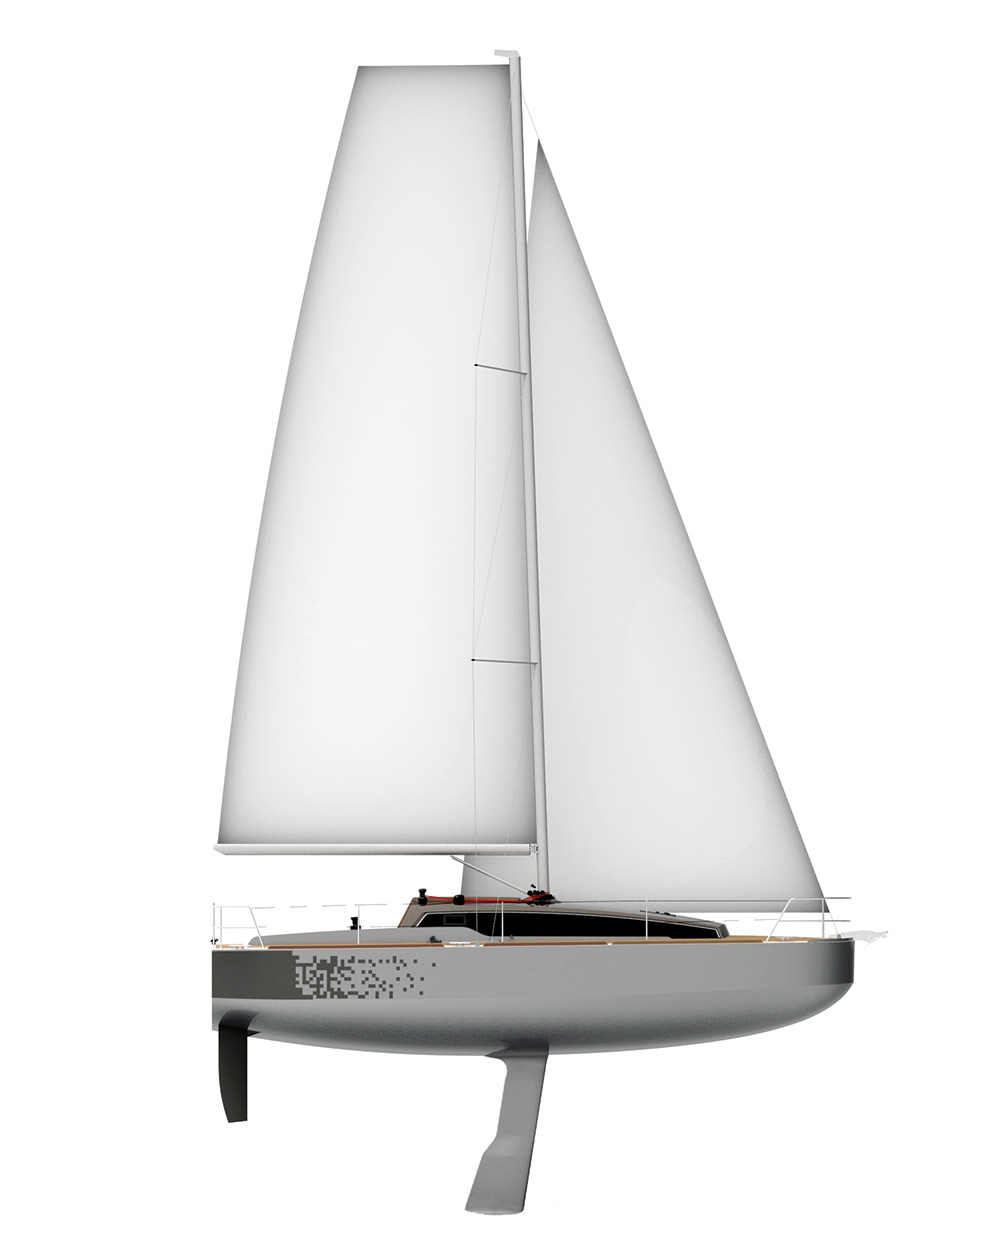 scow bow yacht